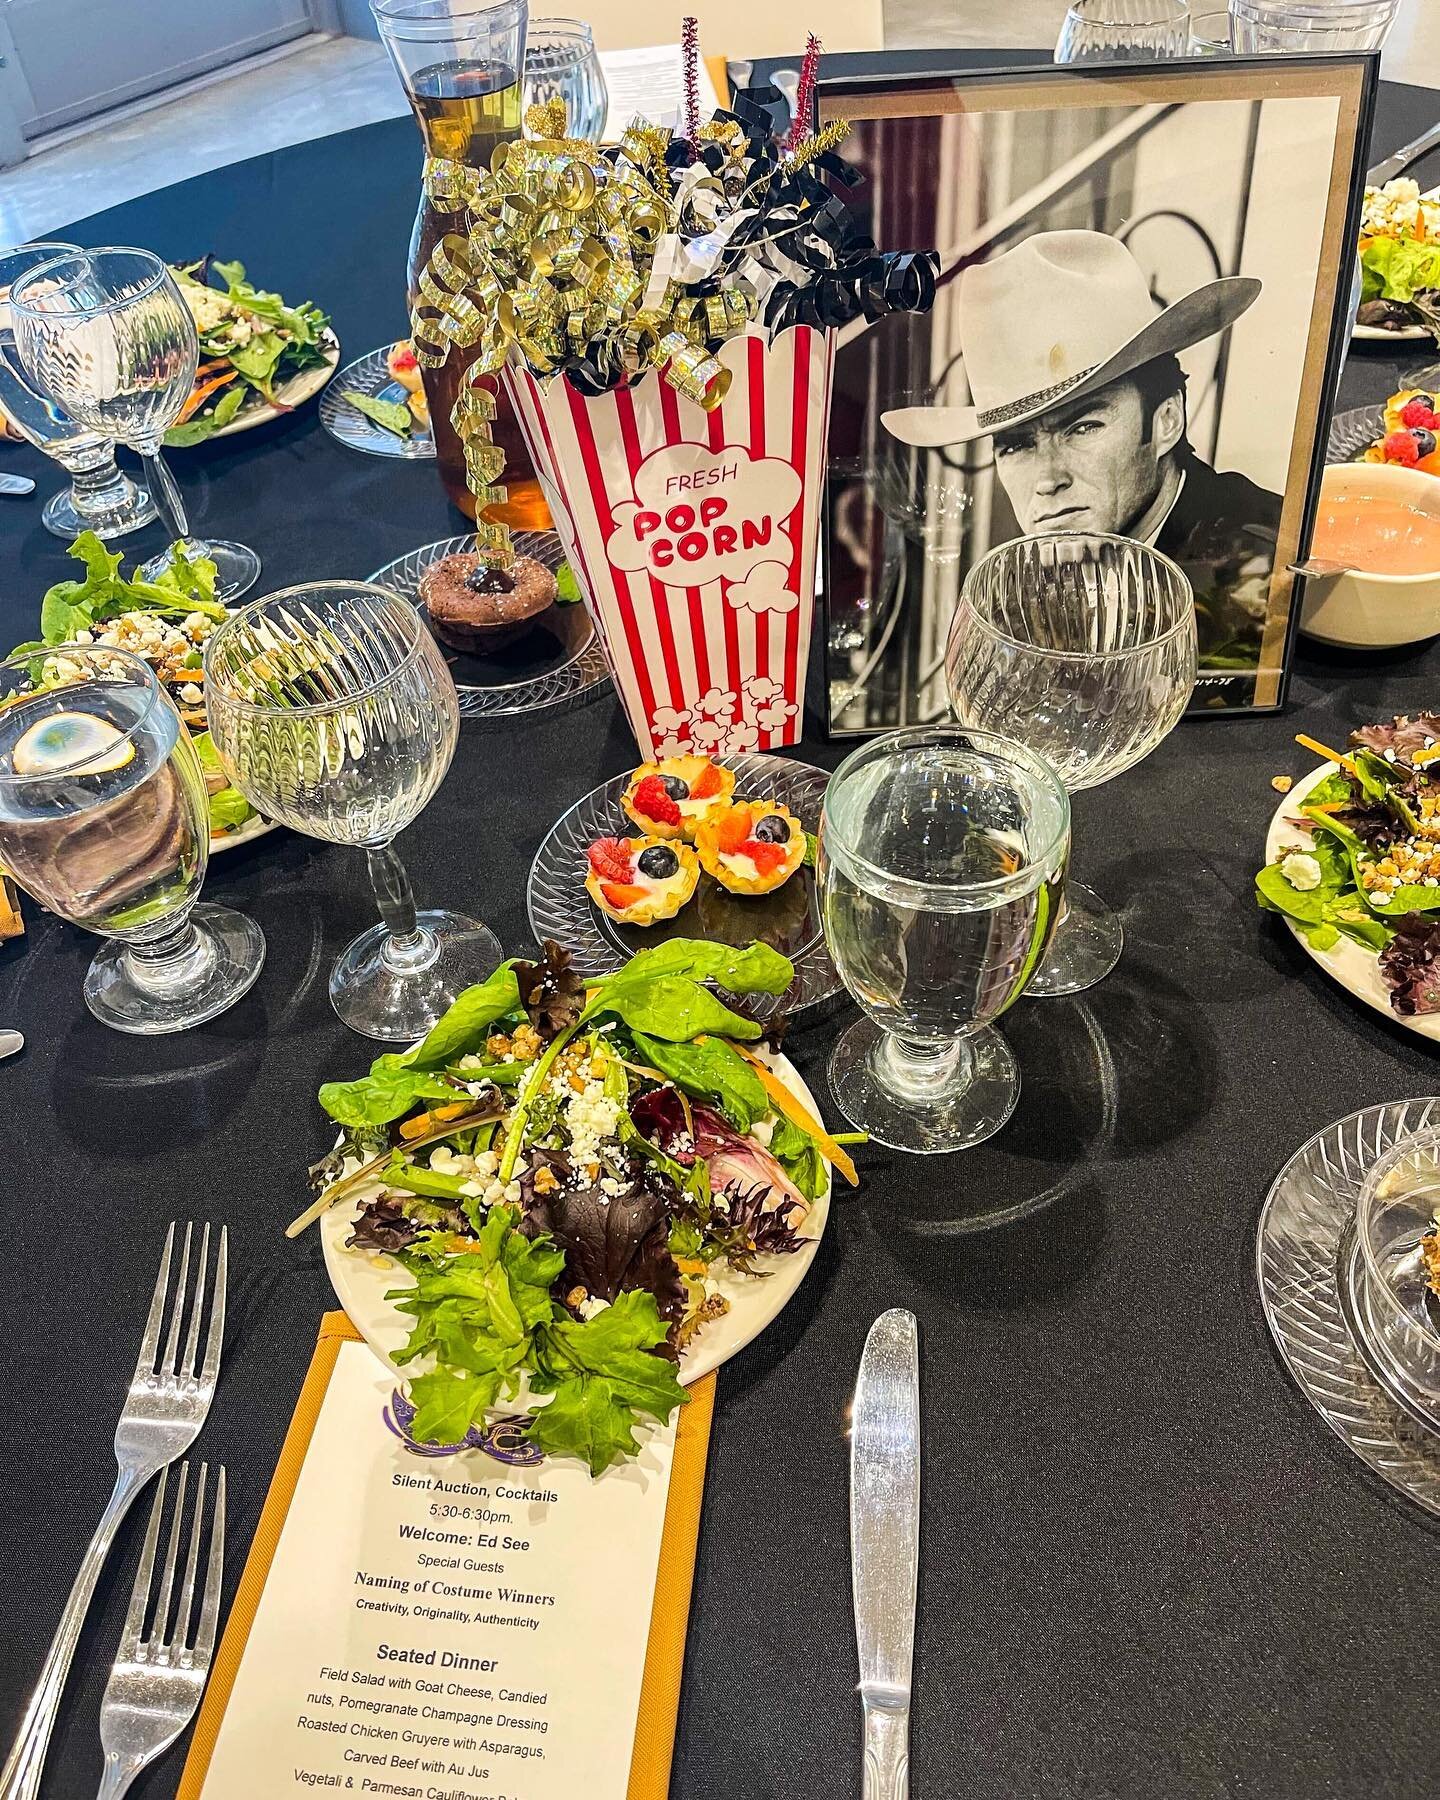 We had a great night at the scholarship dinner for The New Theatre Guild!
.
.
.
.
.
.
#catering #eventcatering #kccatering #kansascitycatering #weddingcaterer #weddings #kcweddings